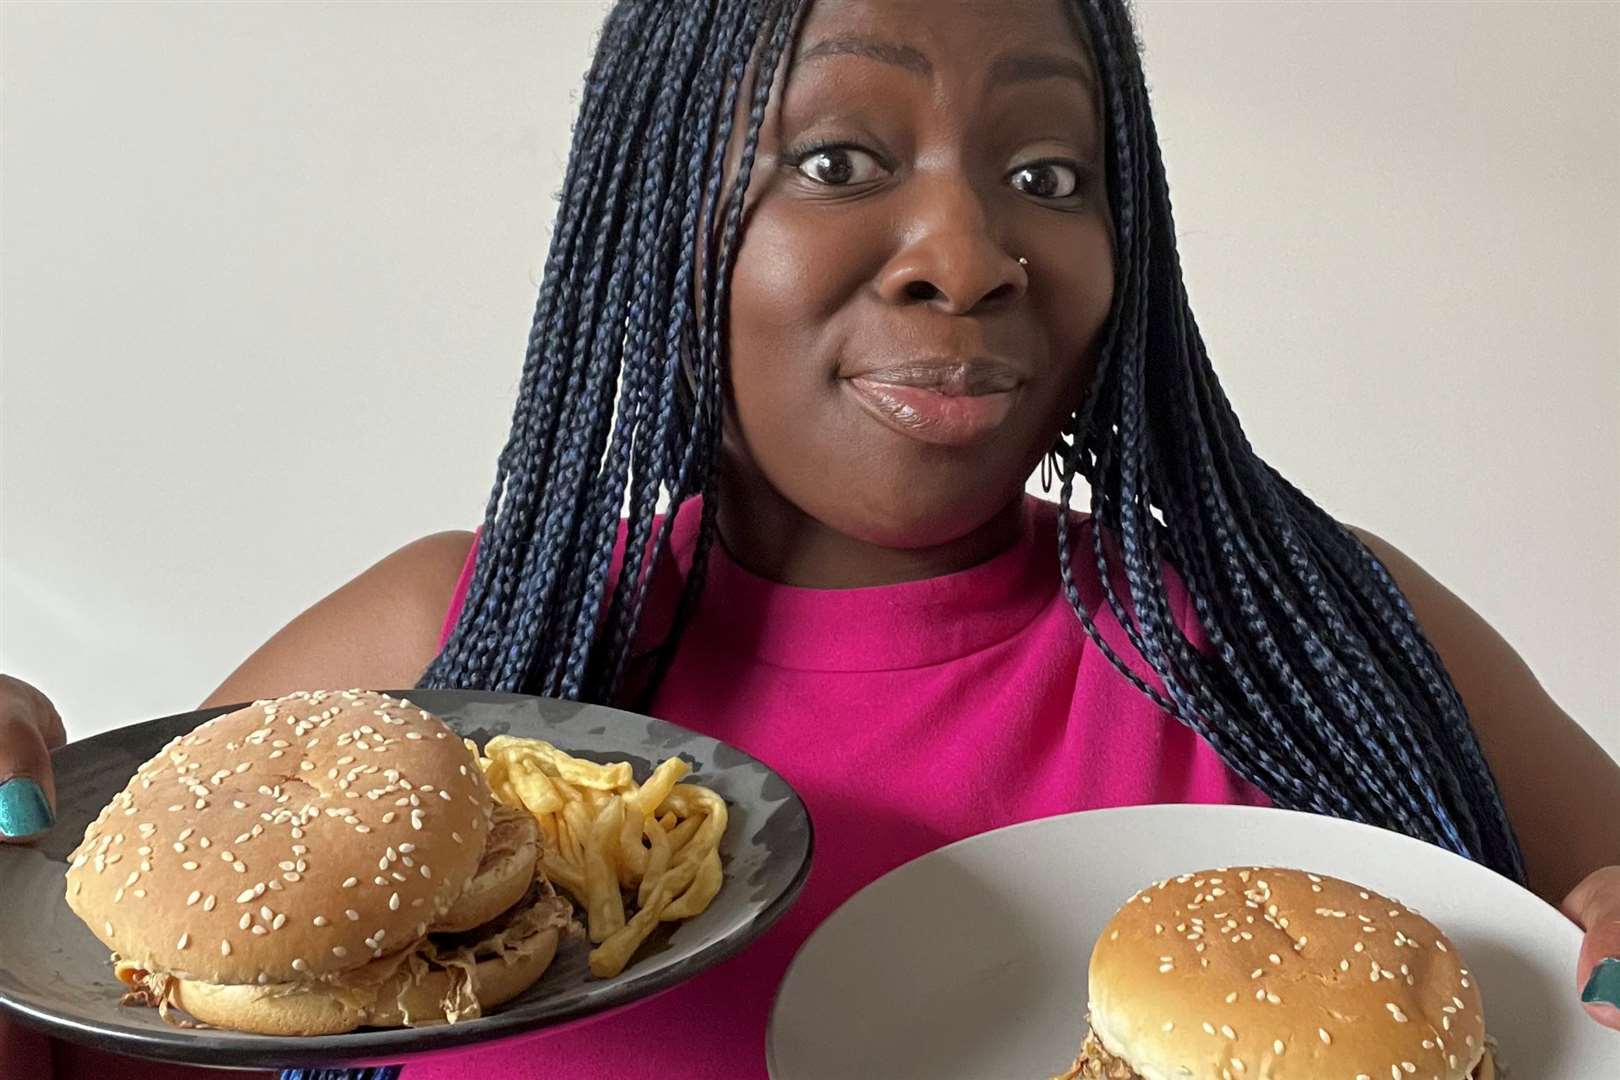 Naa Adjeley with the nine-month-old Big Mac and four-month-old McPlant burger. Picture: tsofanye